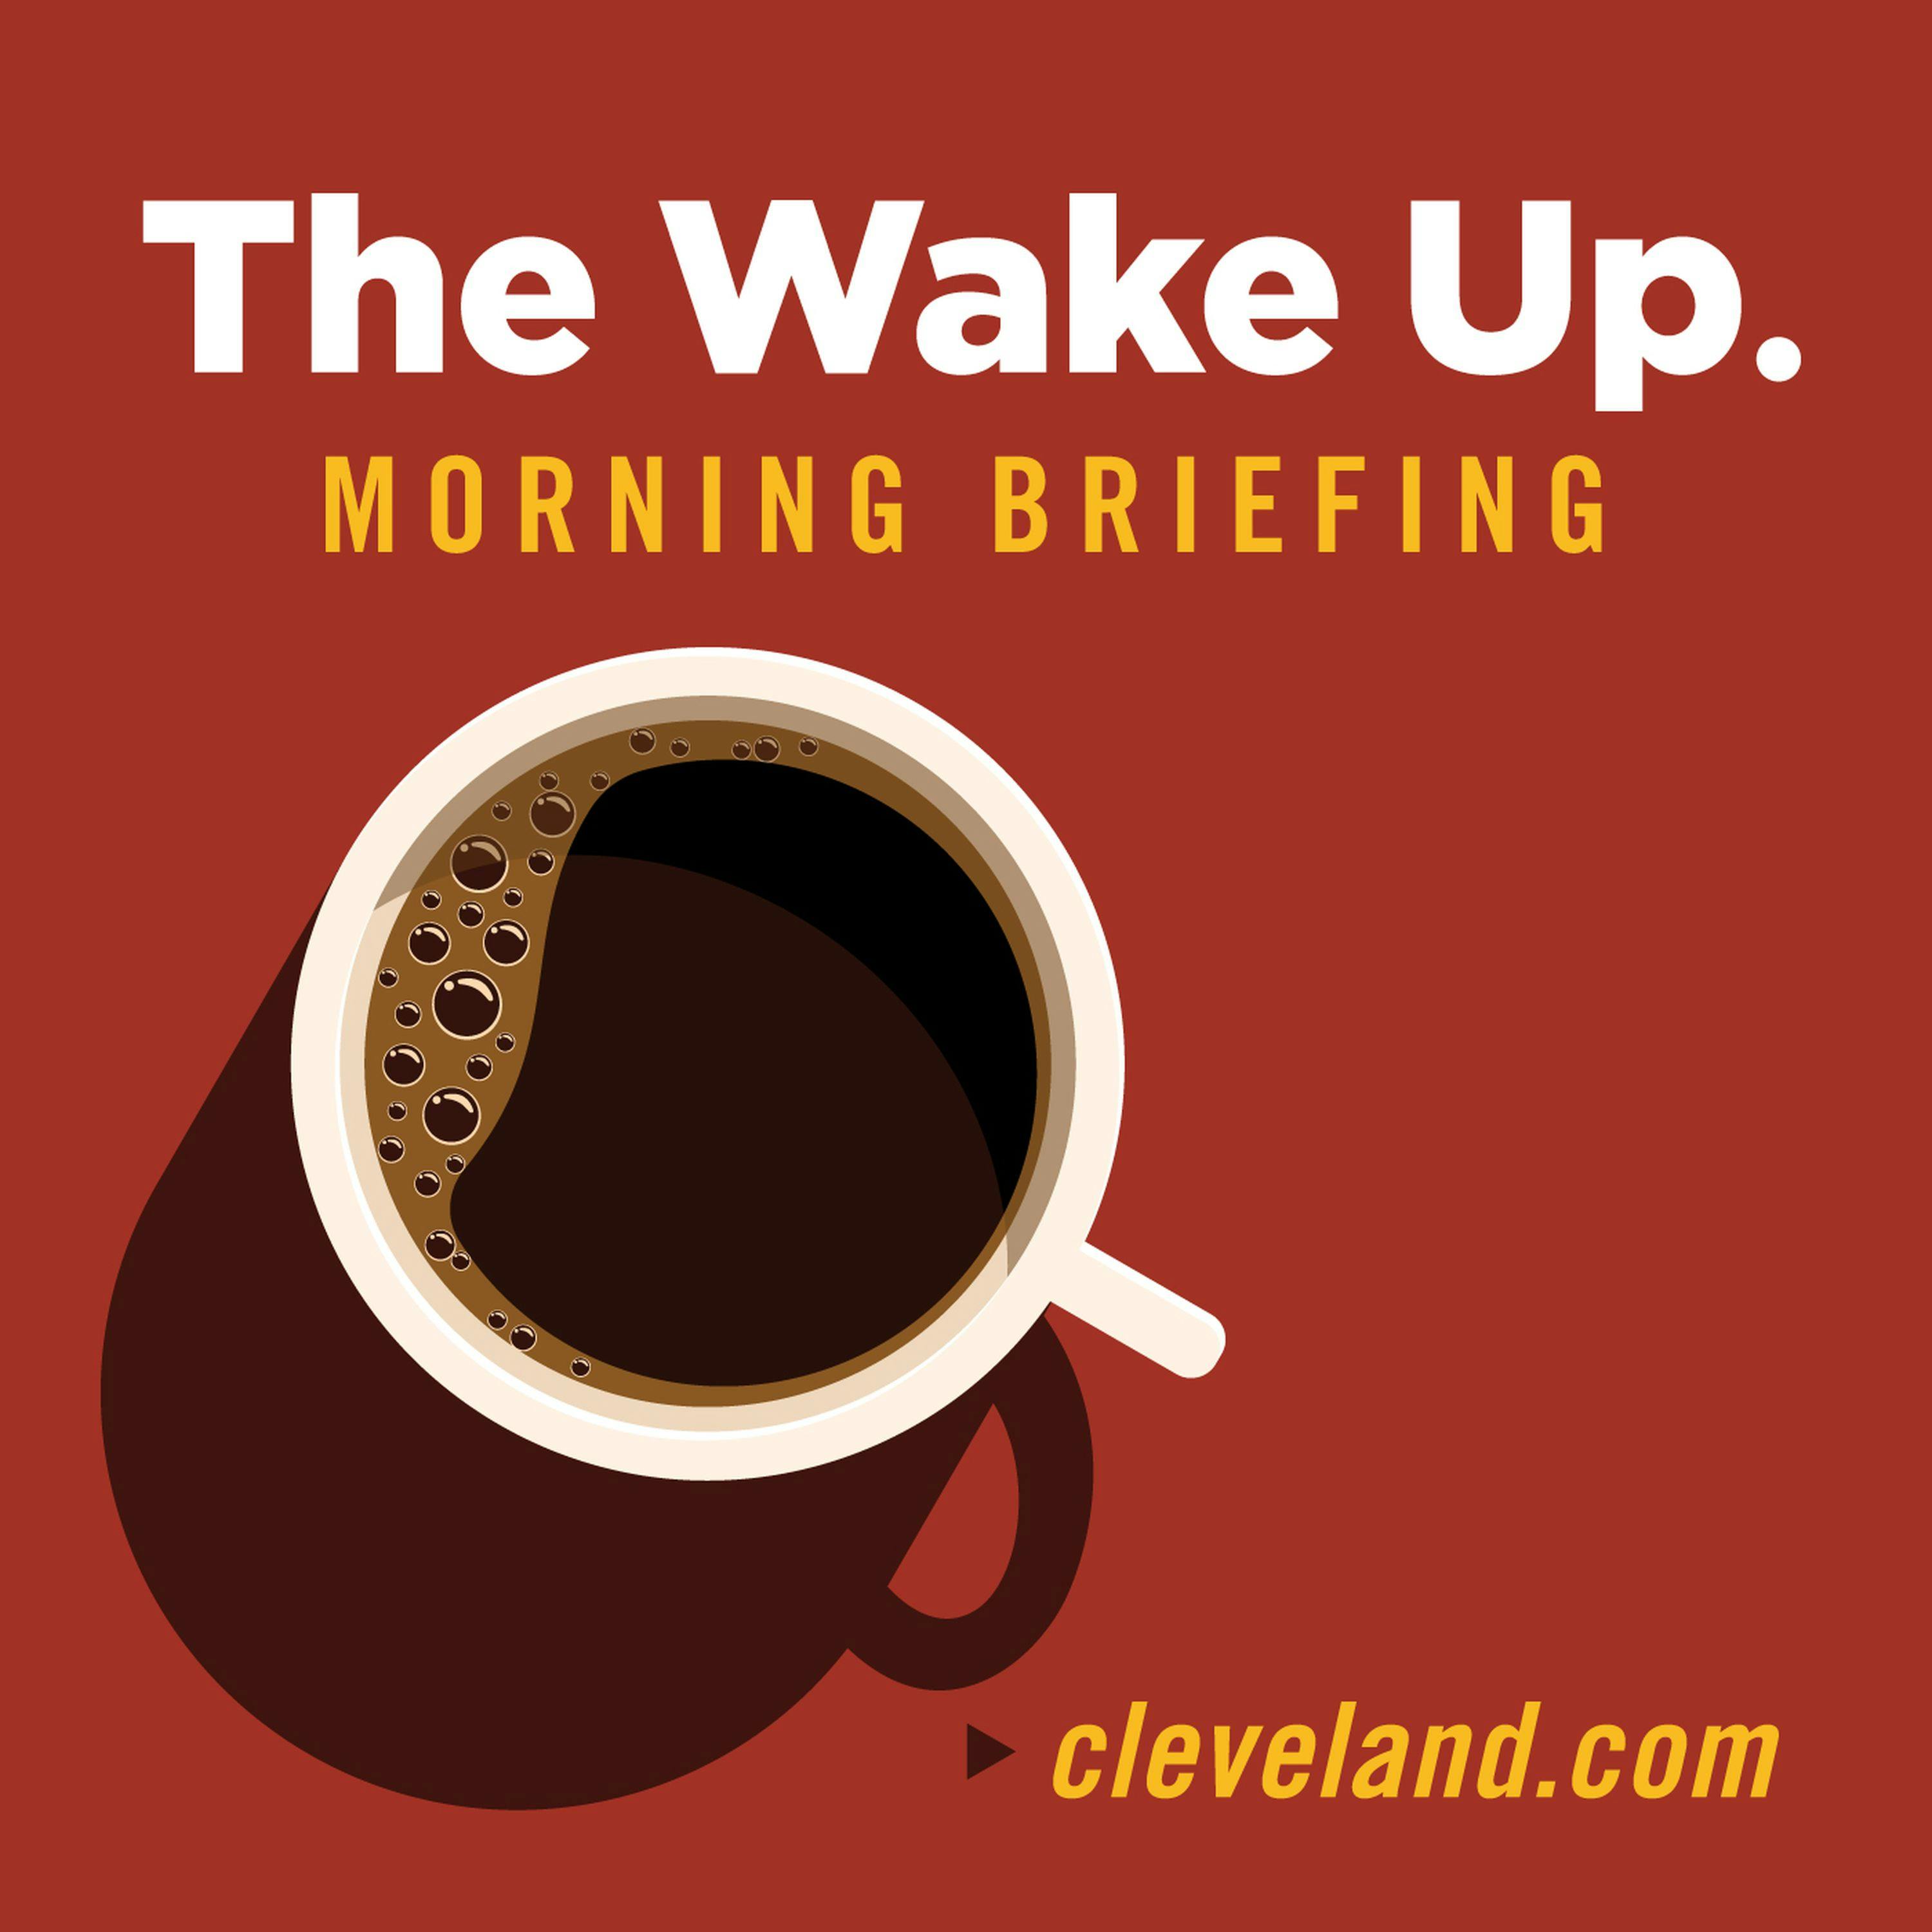 The Wake Up – July 19, 2021 Most Cleveland mayoral candidates oppose proposed charter amendment creating independent, powerful police civilian review board